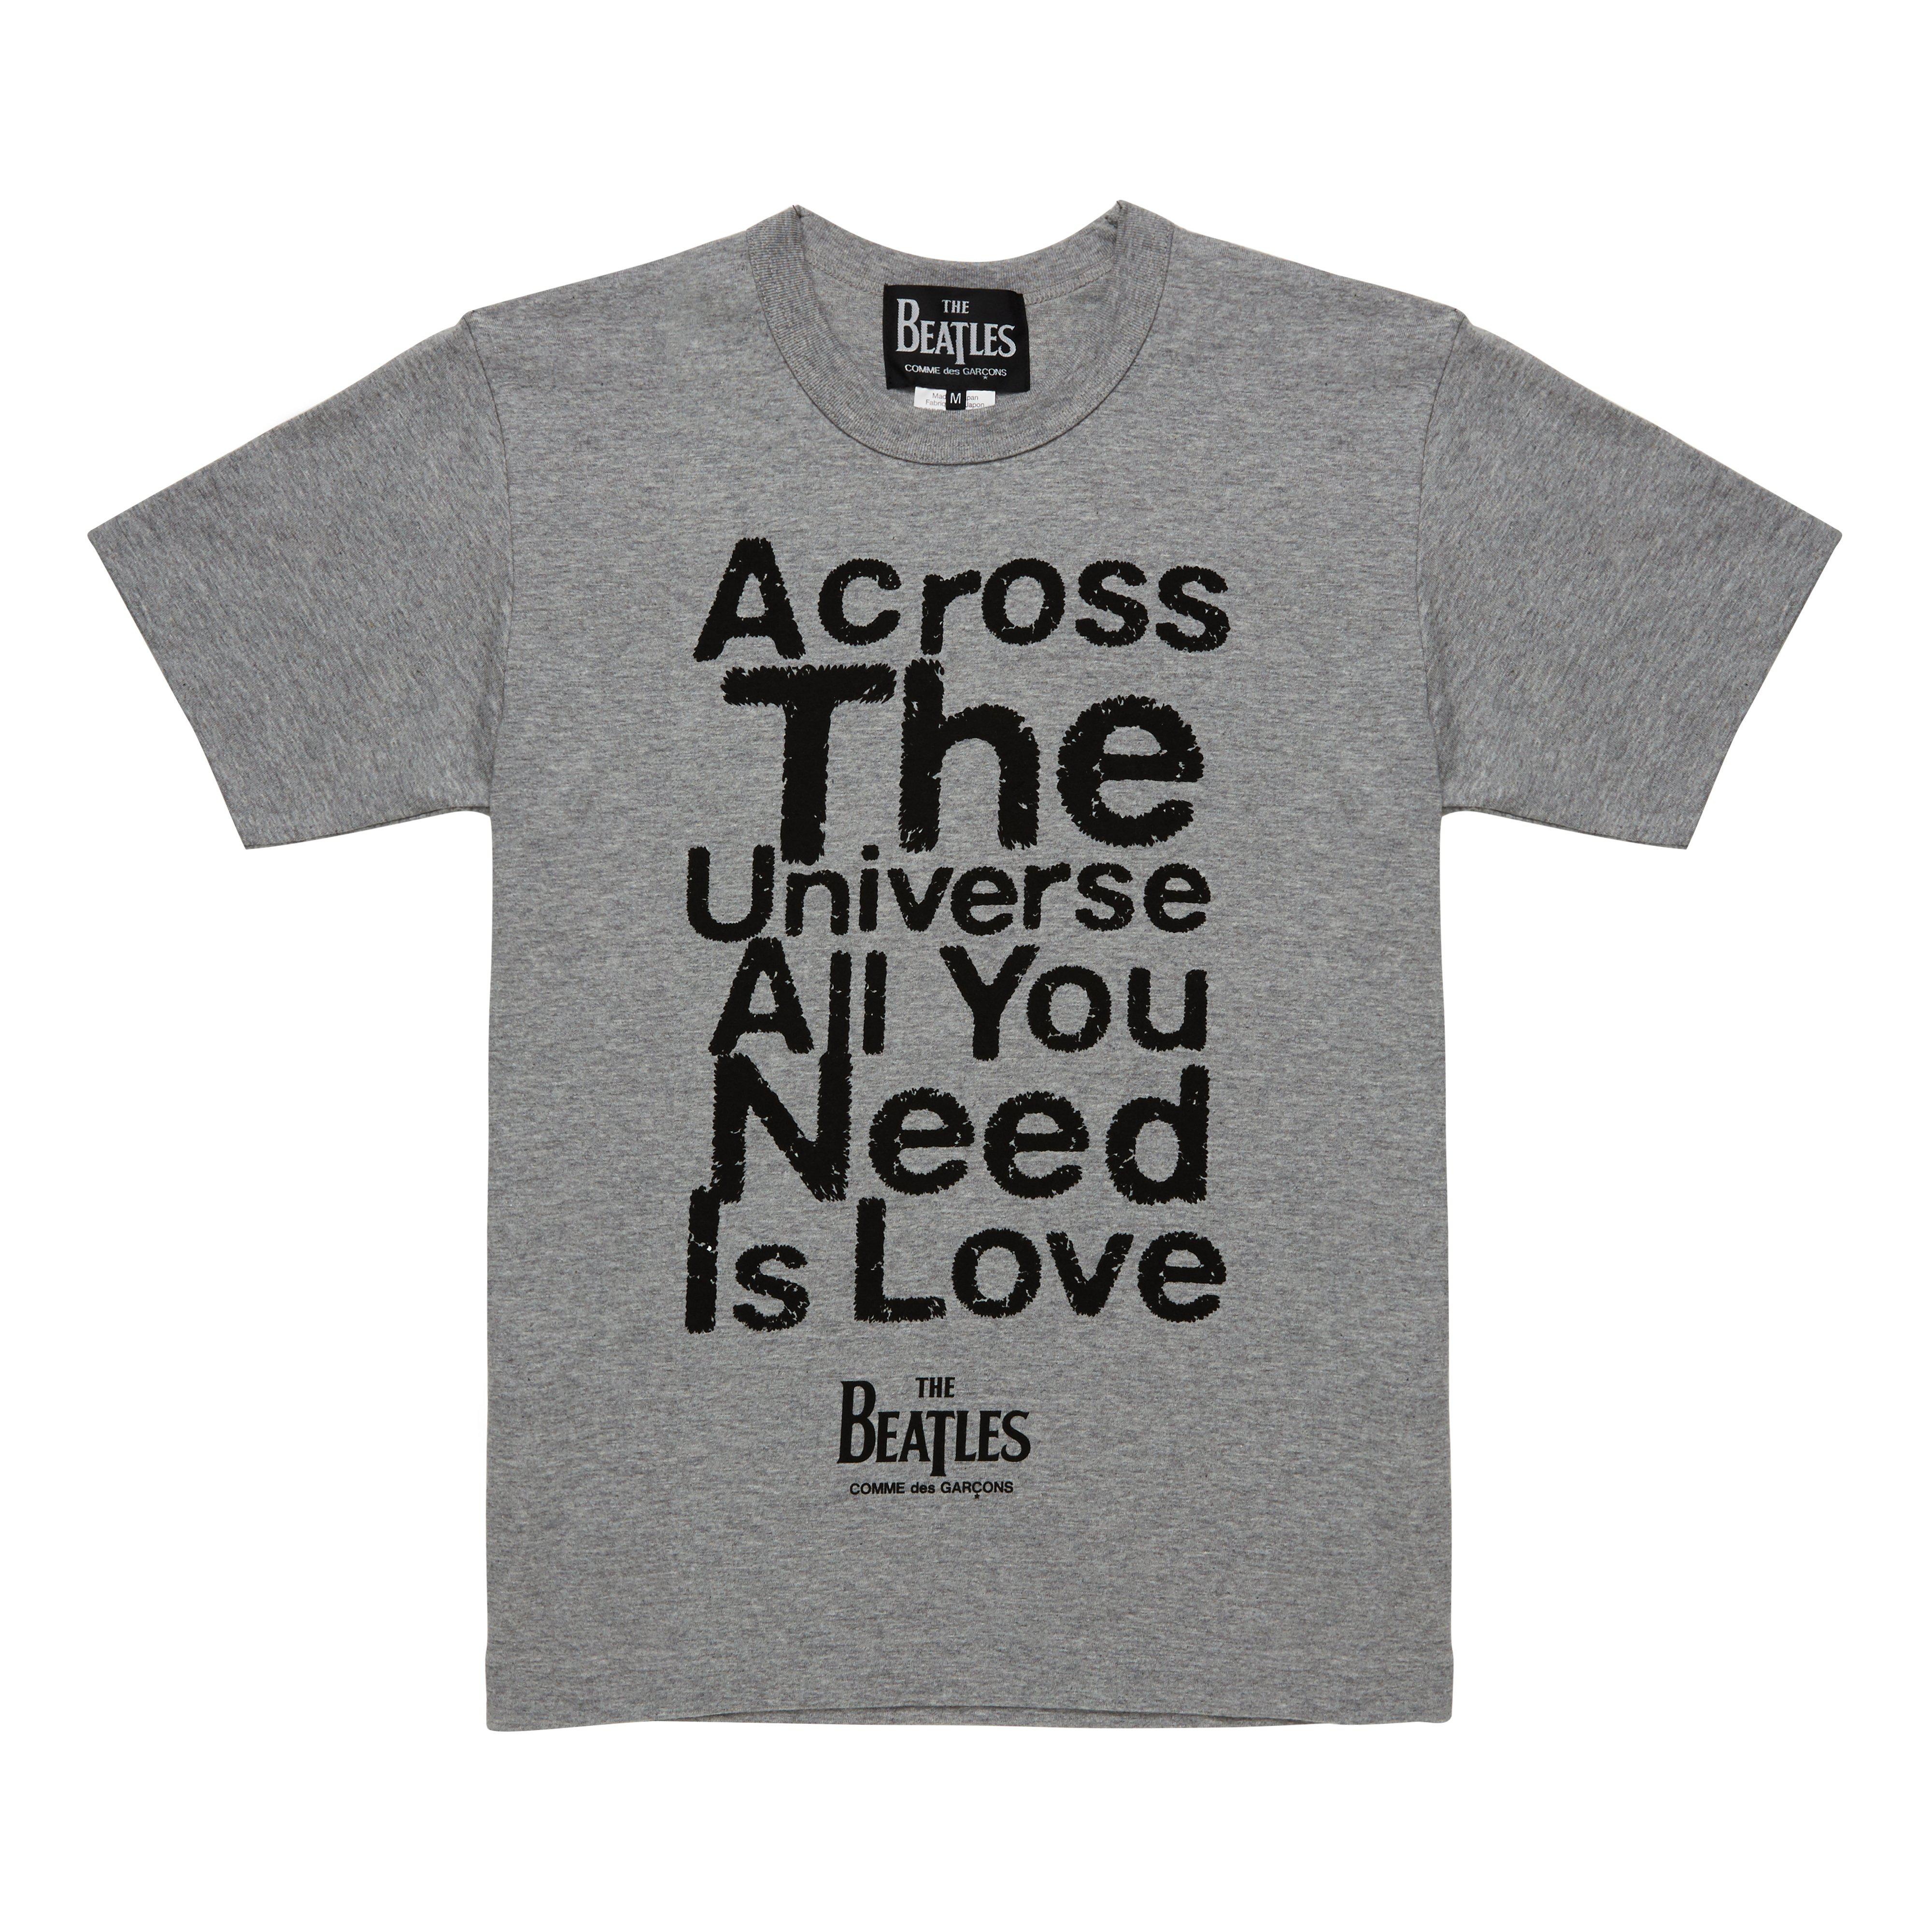 CDG x The Beatles T-Shirt (Grey) by COMME DES GARCONS X BEATLES